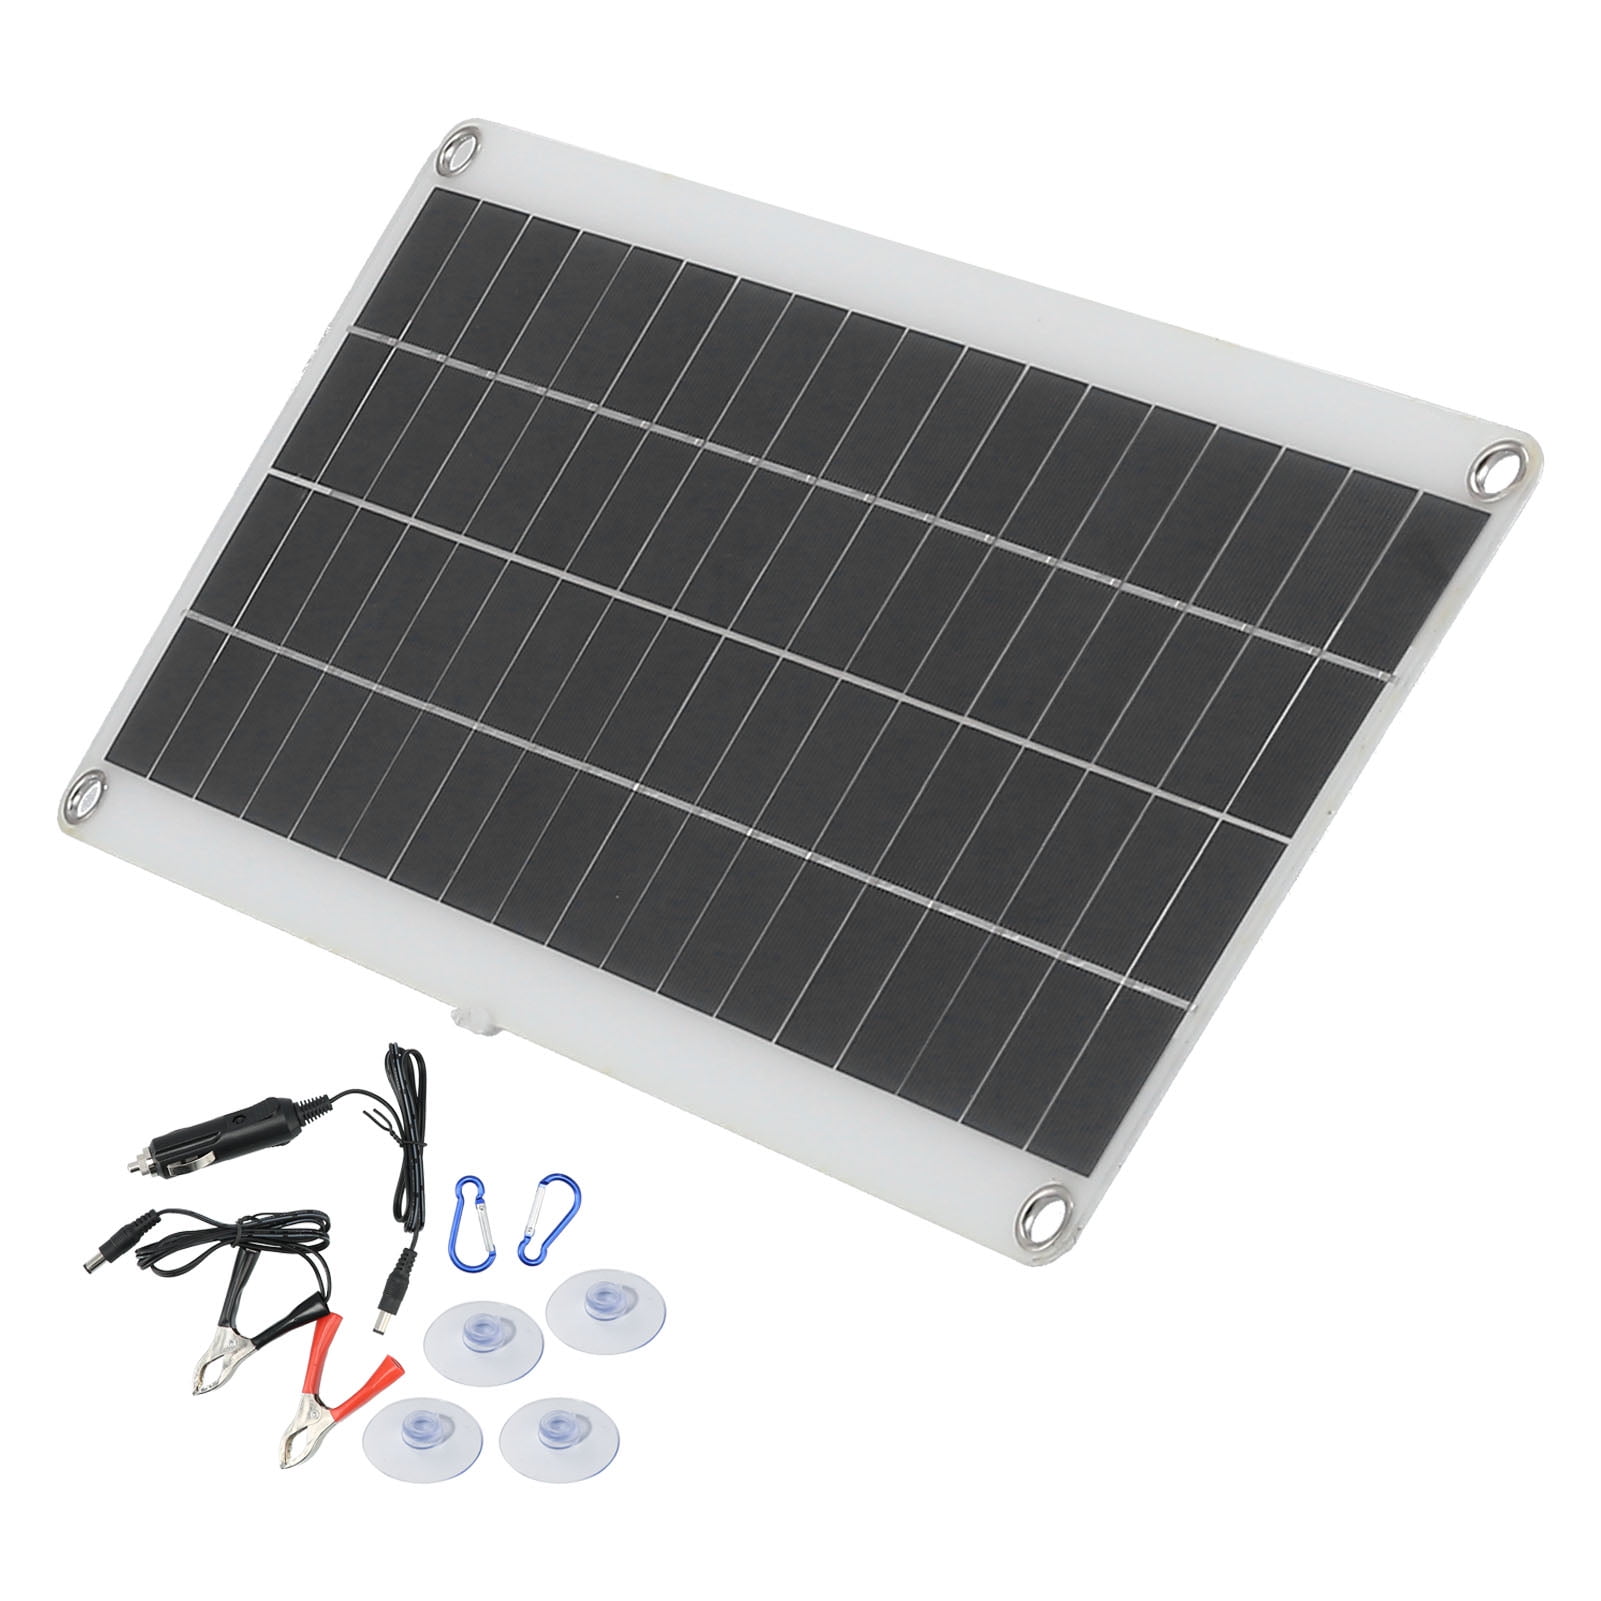 Details about   Portable Flexible Solar Panels High Efficiency Solid Outdoor Charger Controllers 